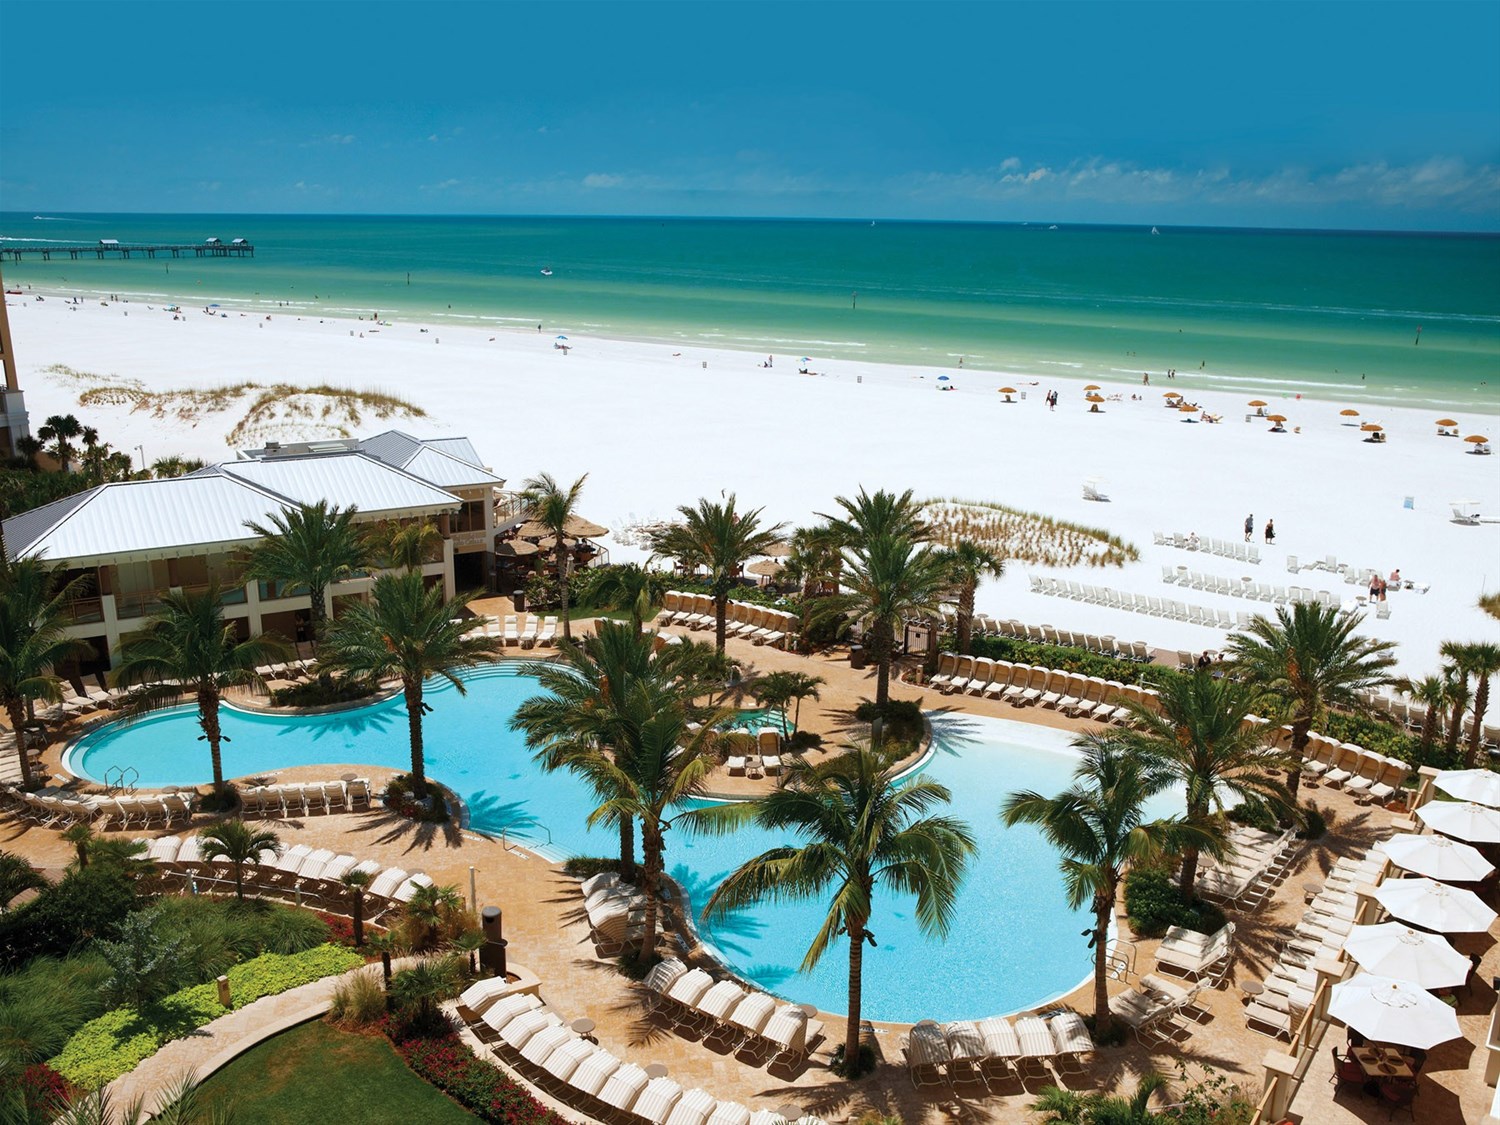 Sandpearl Resort Clearwater Florida Trailfinders the Travel Experts